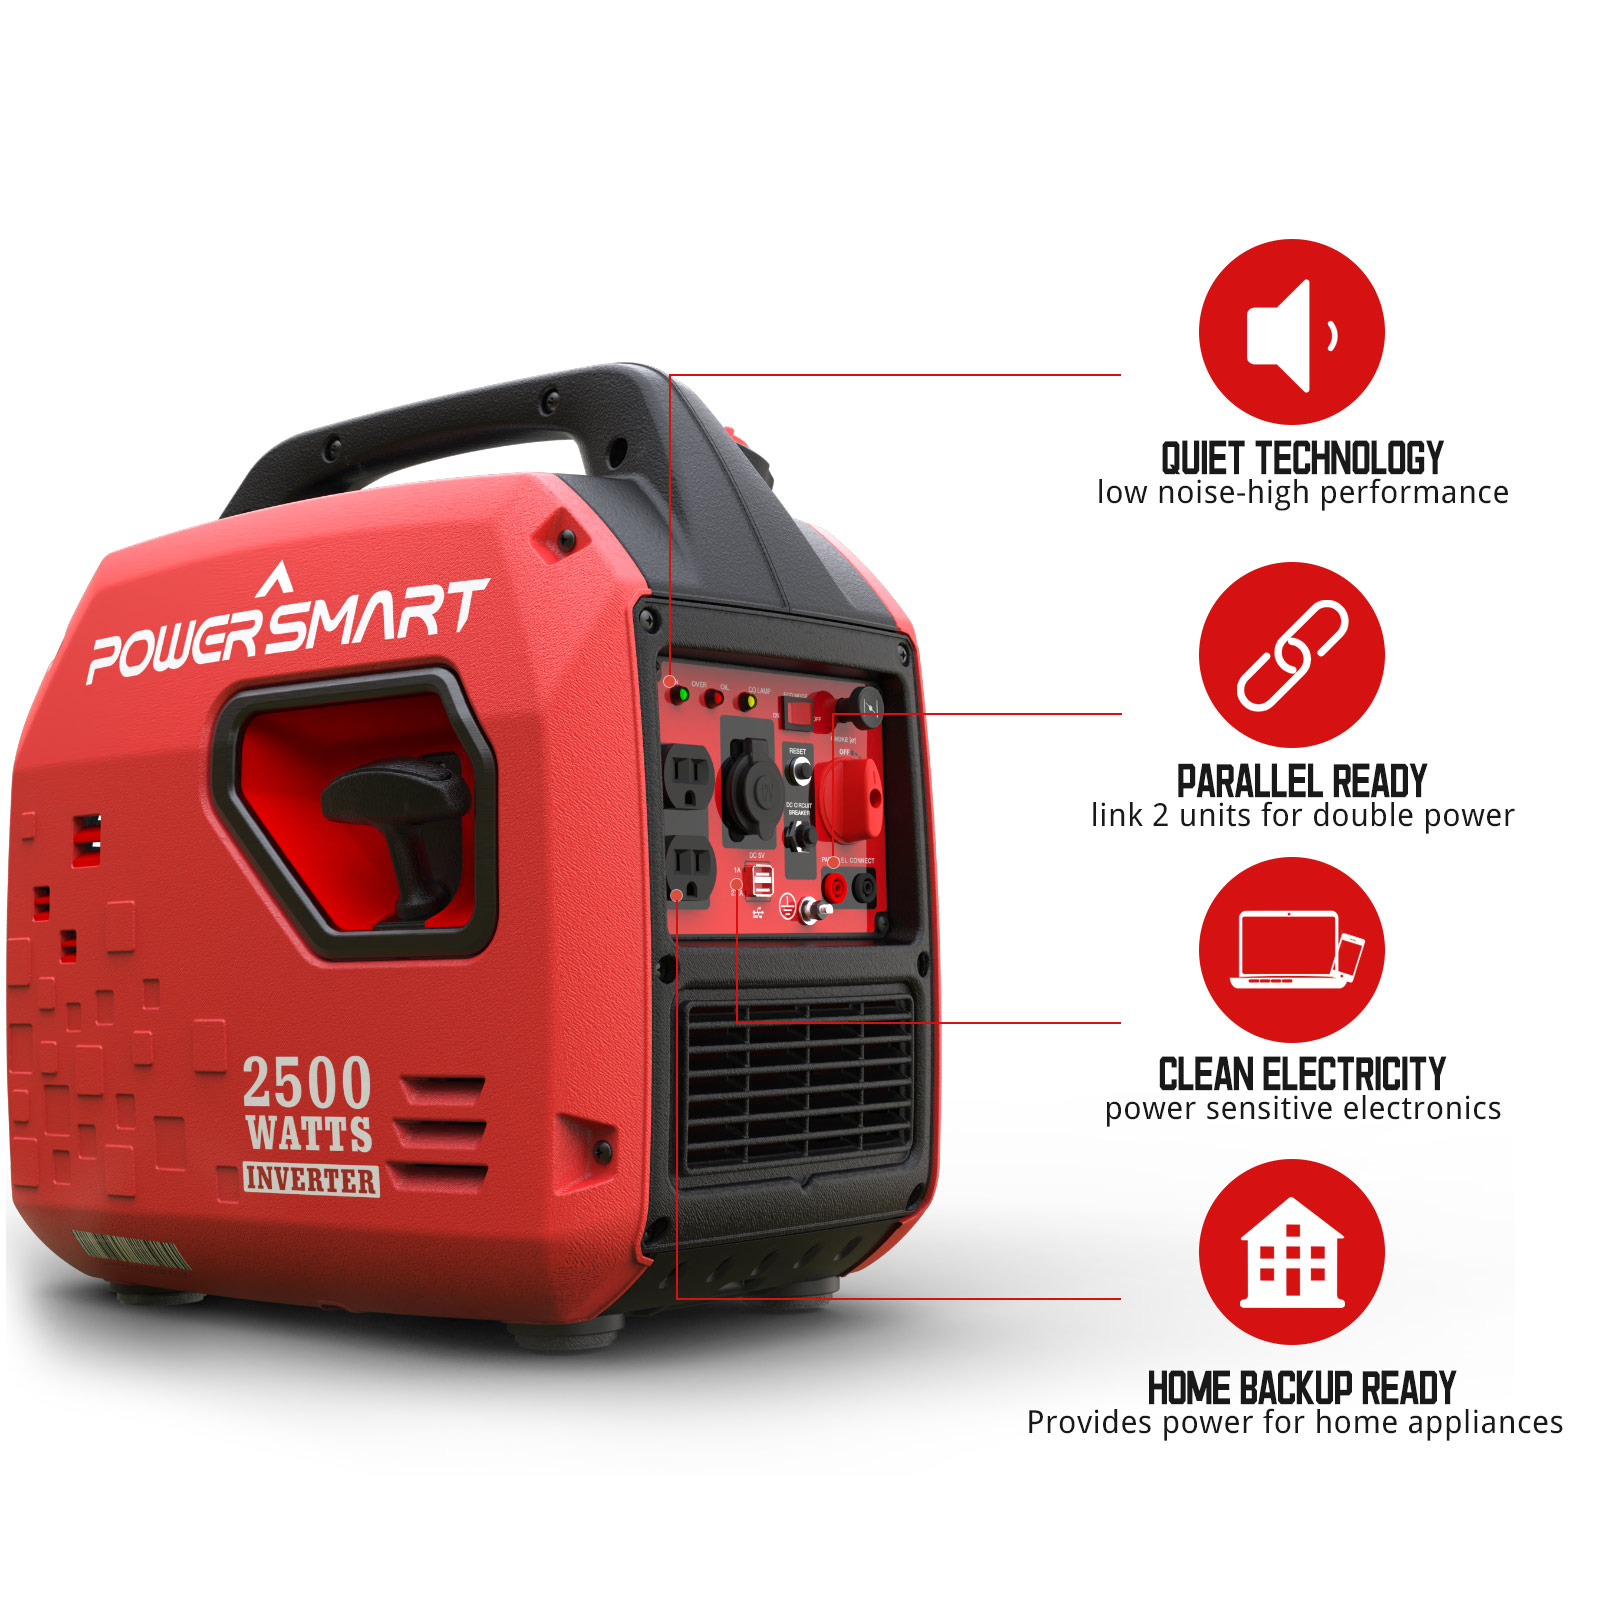 PowerSmart 2500Watt Portable Inverter Gas Powered Generator for Outdoors Camping,Low Noise - image 4 of 6